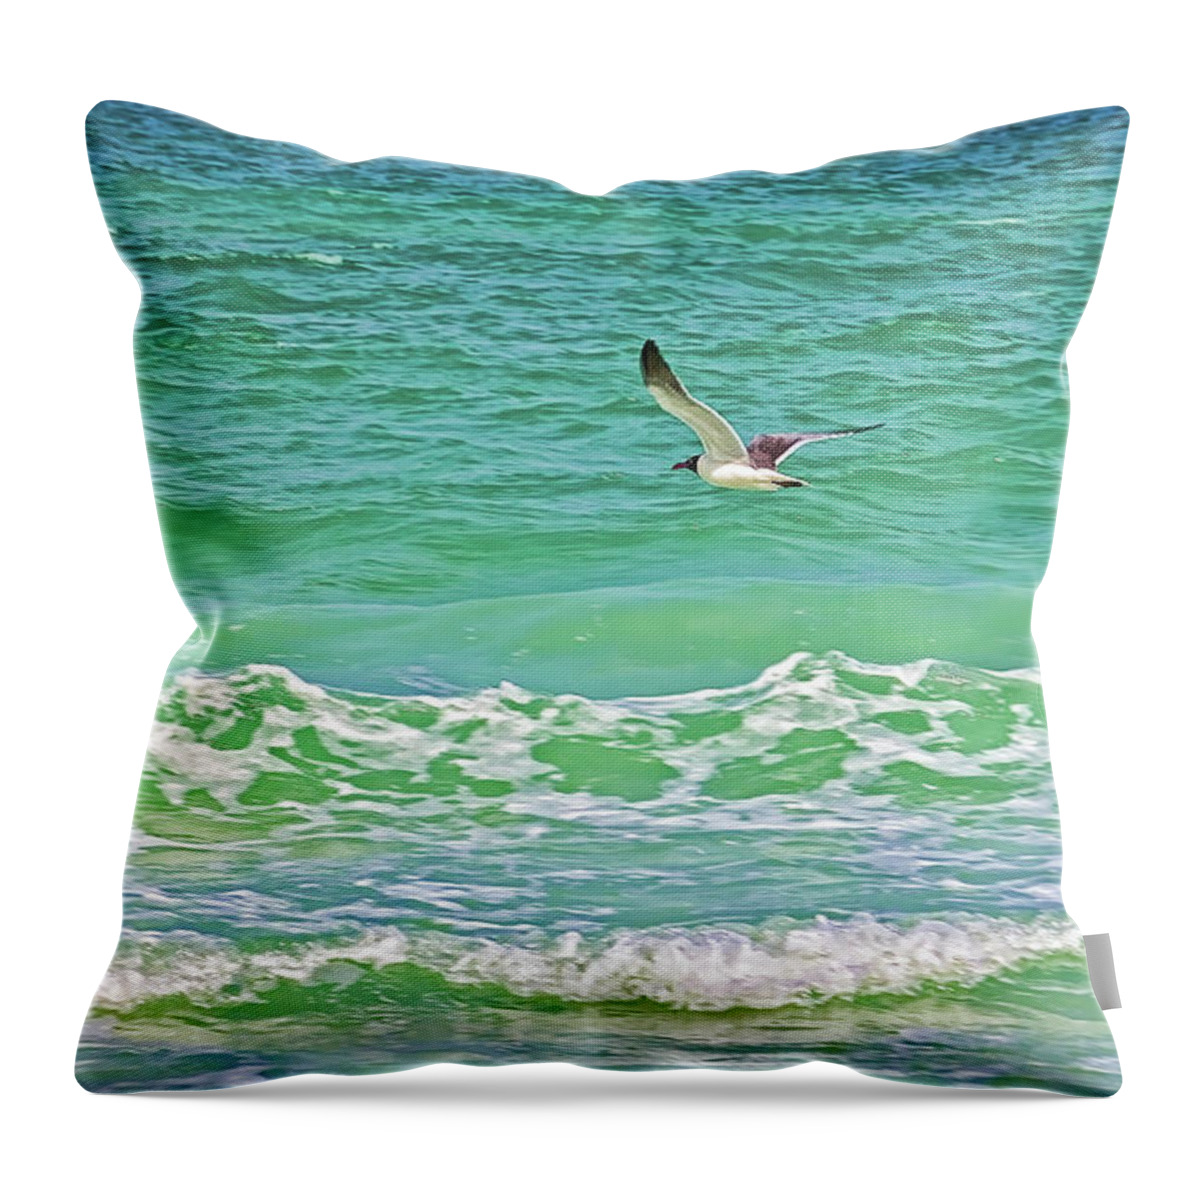 Gulf Of Mexico Throw Pillow featuring the photograph Flying Solo by HH Photography of Florida